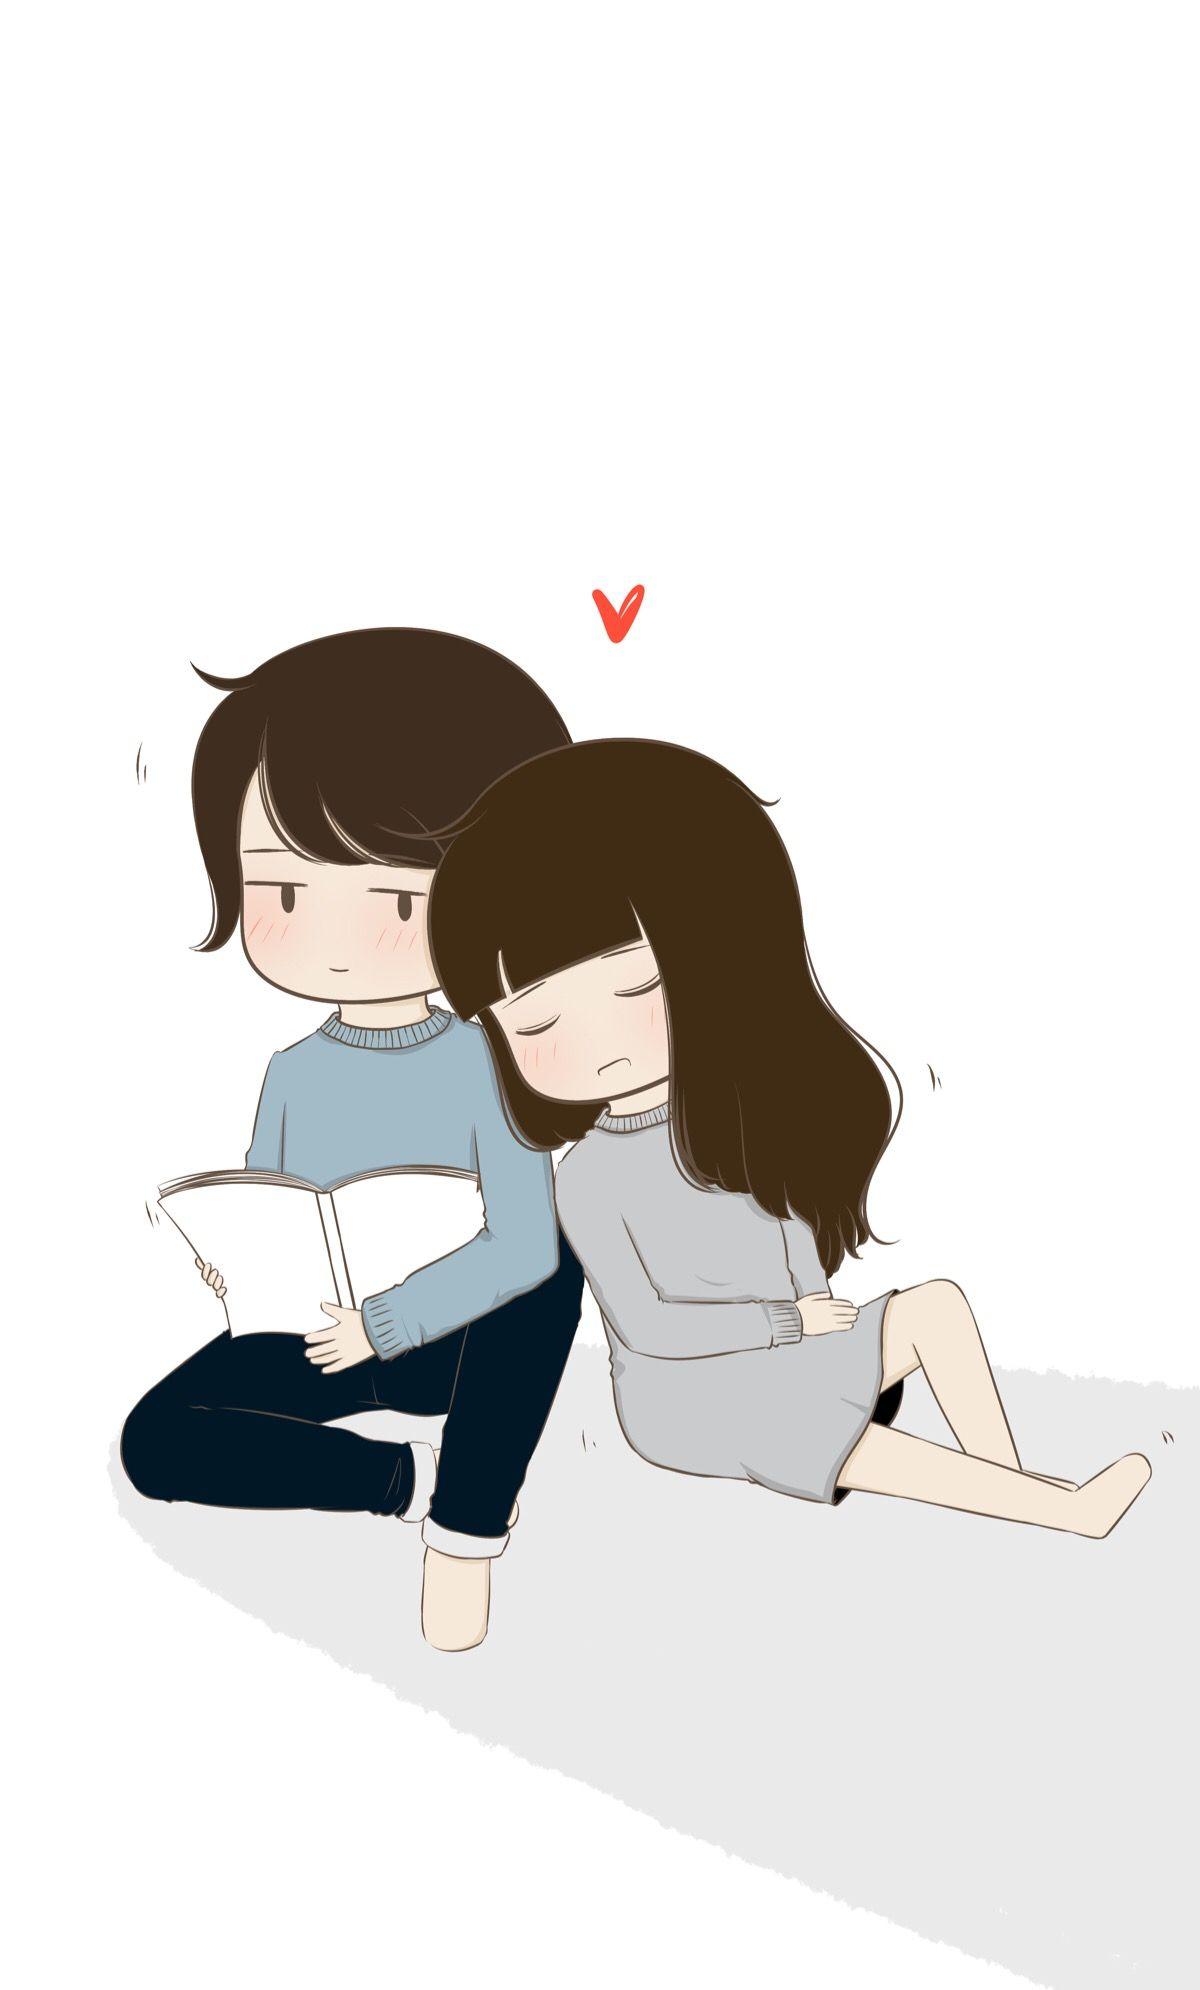 Cute Couple Drawings - Musely-saigonsouth.com.vn